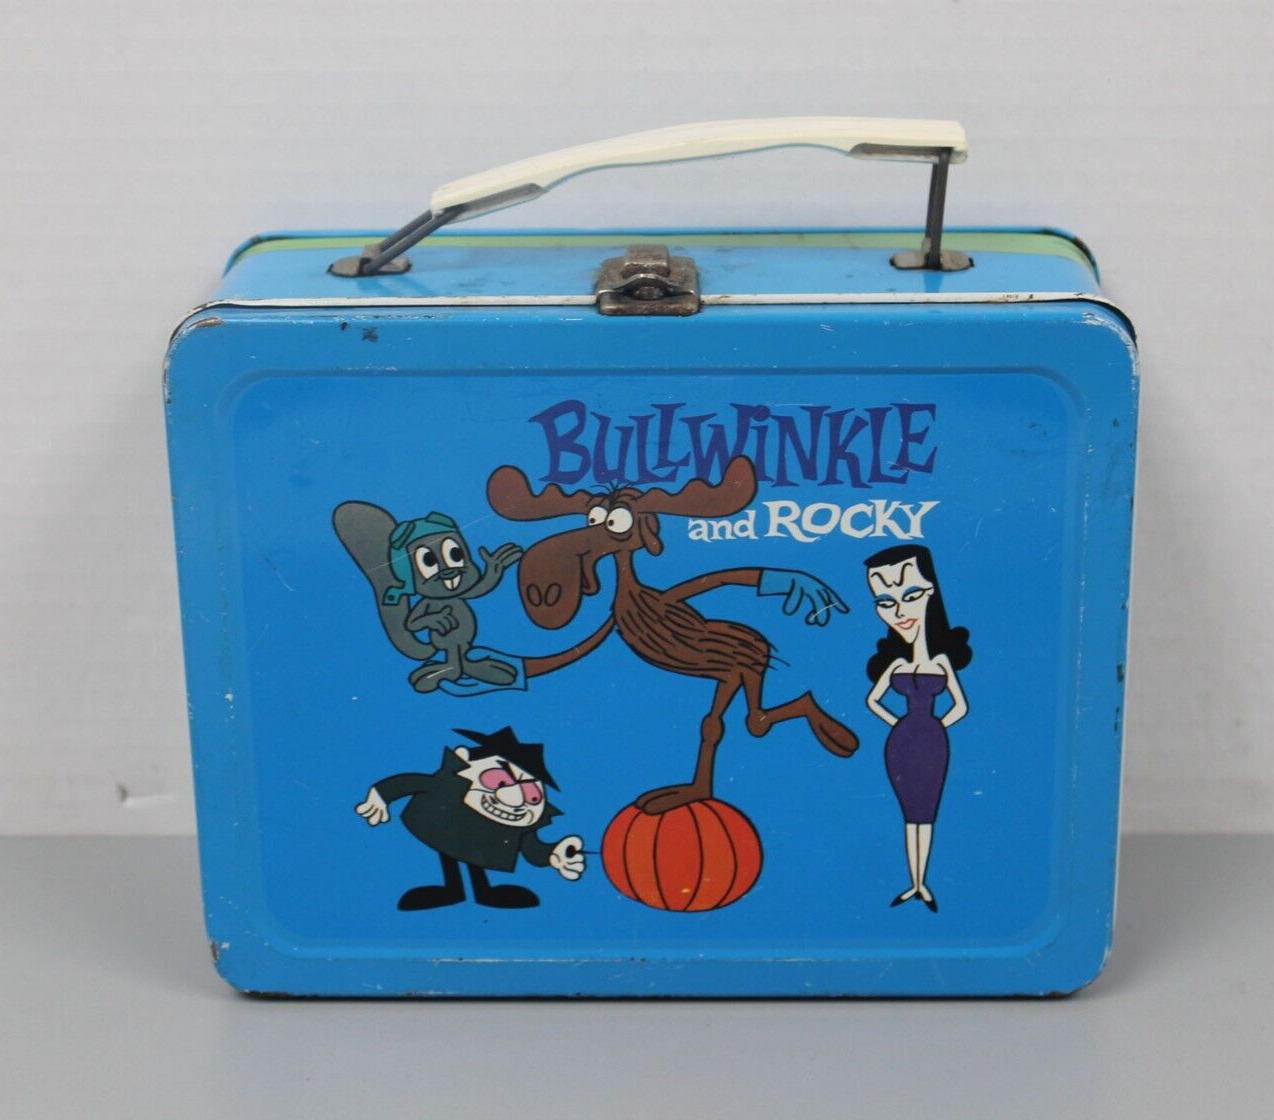 Vintage 1962 Bullwinkle and Rocky Lunch Box - Jay Ward - No Thermos - Rare